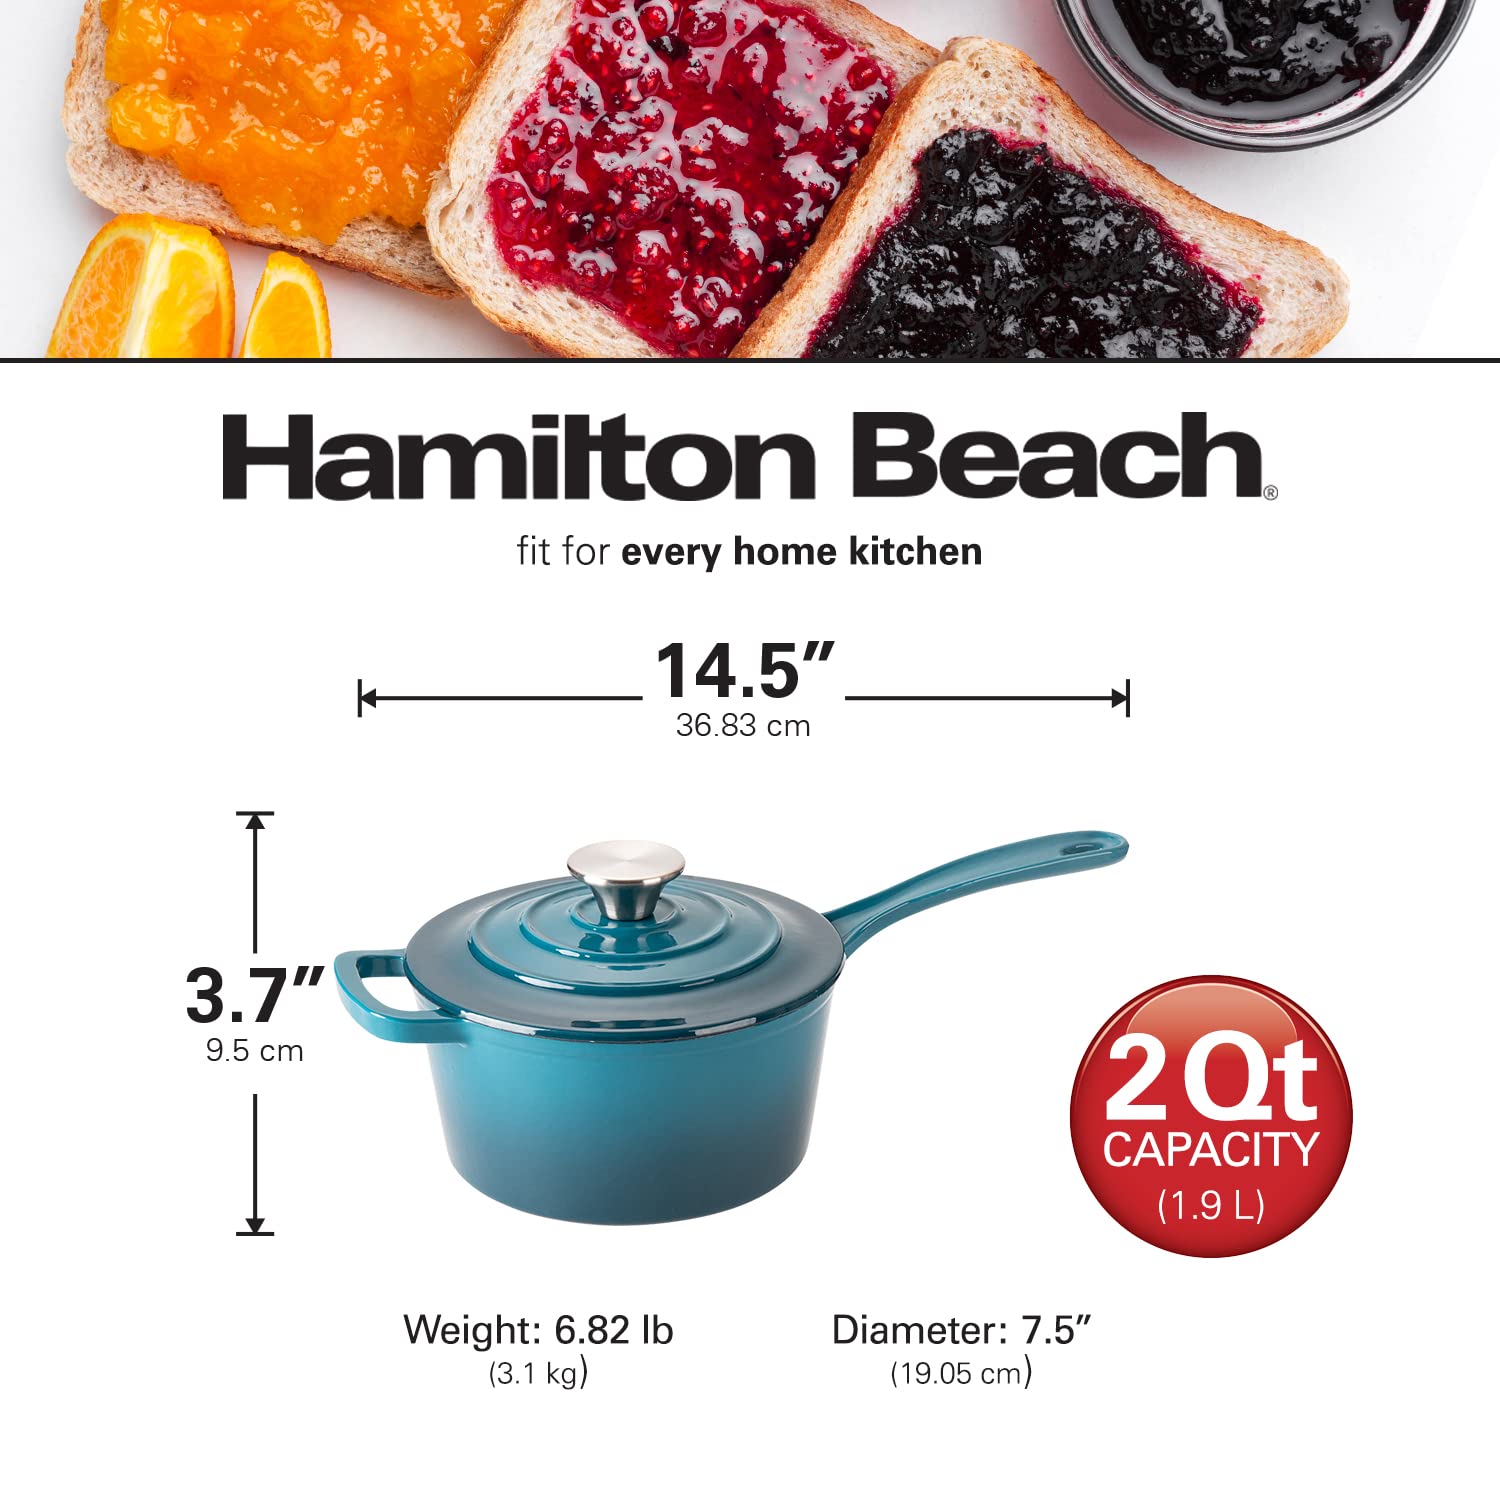 Hamilton Beach Enameled Cast Iron Sauce Pan 2-Quart Navy, Cream Enamel  coating, Pot For Stove top and Oven Cooking, Even Heat Distribution, Safe  Up to